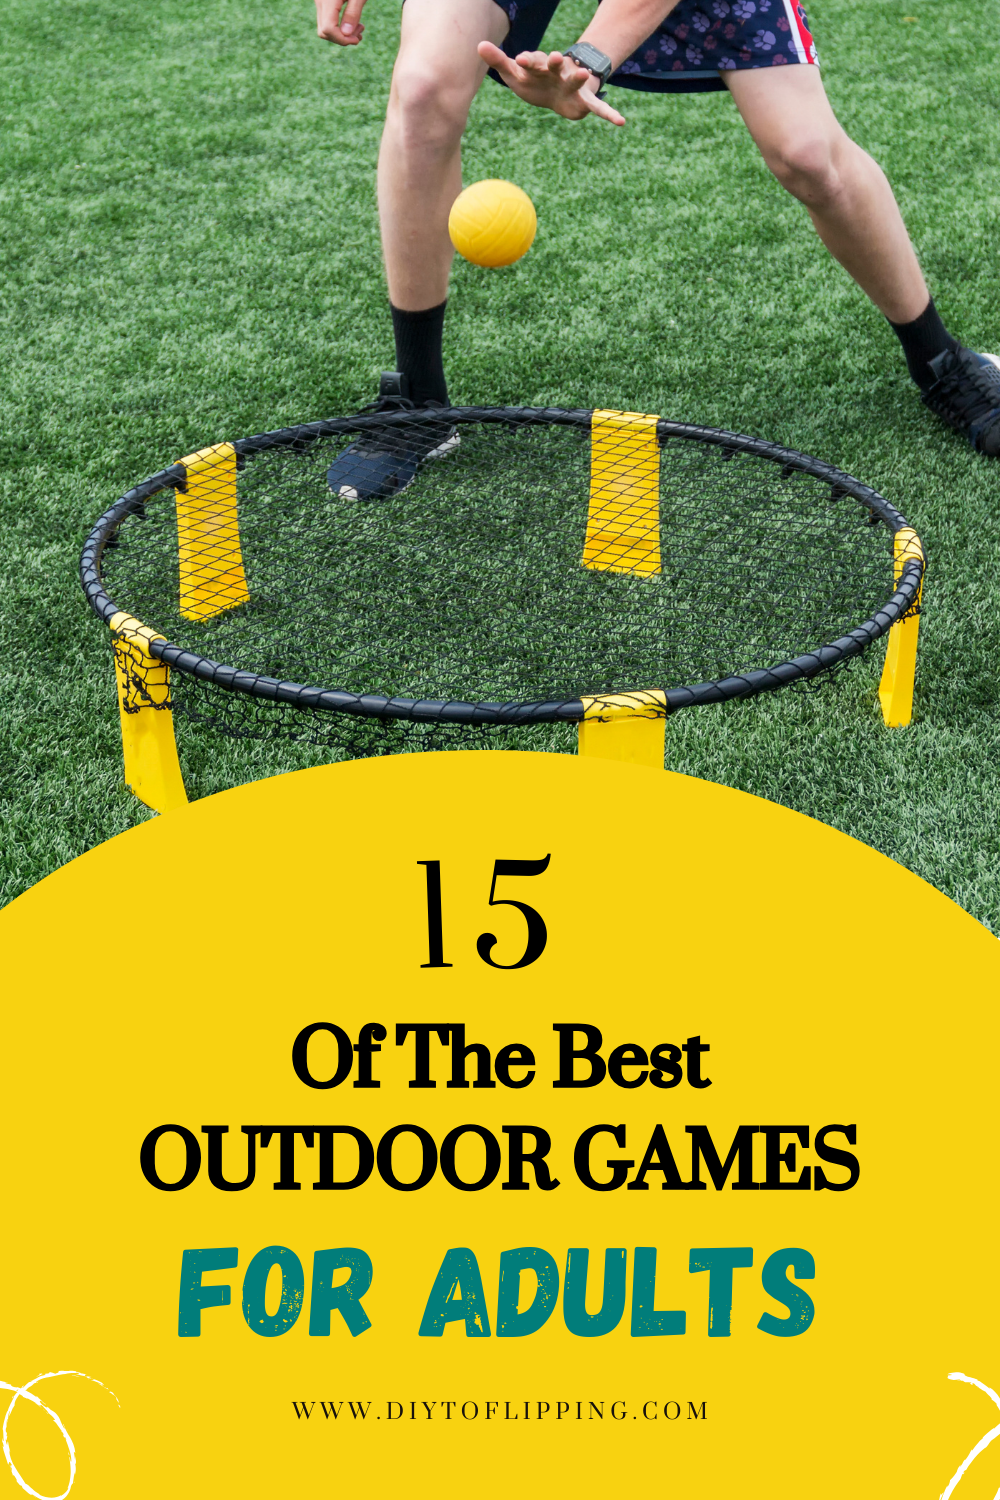 Outdoor games for adults